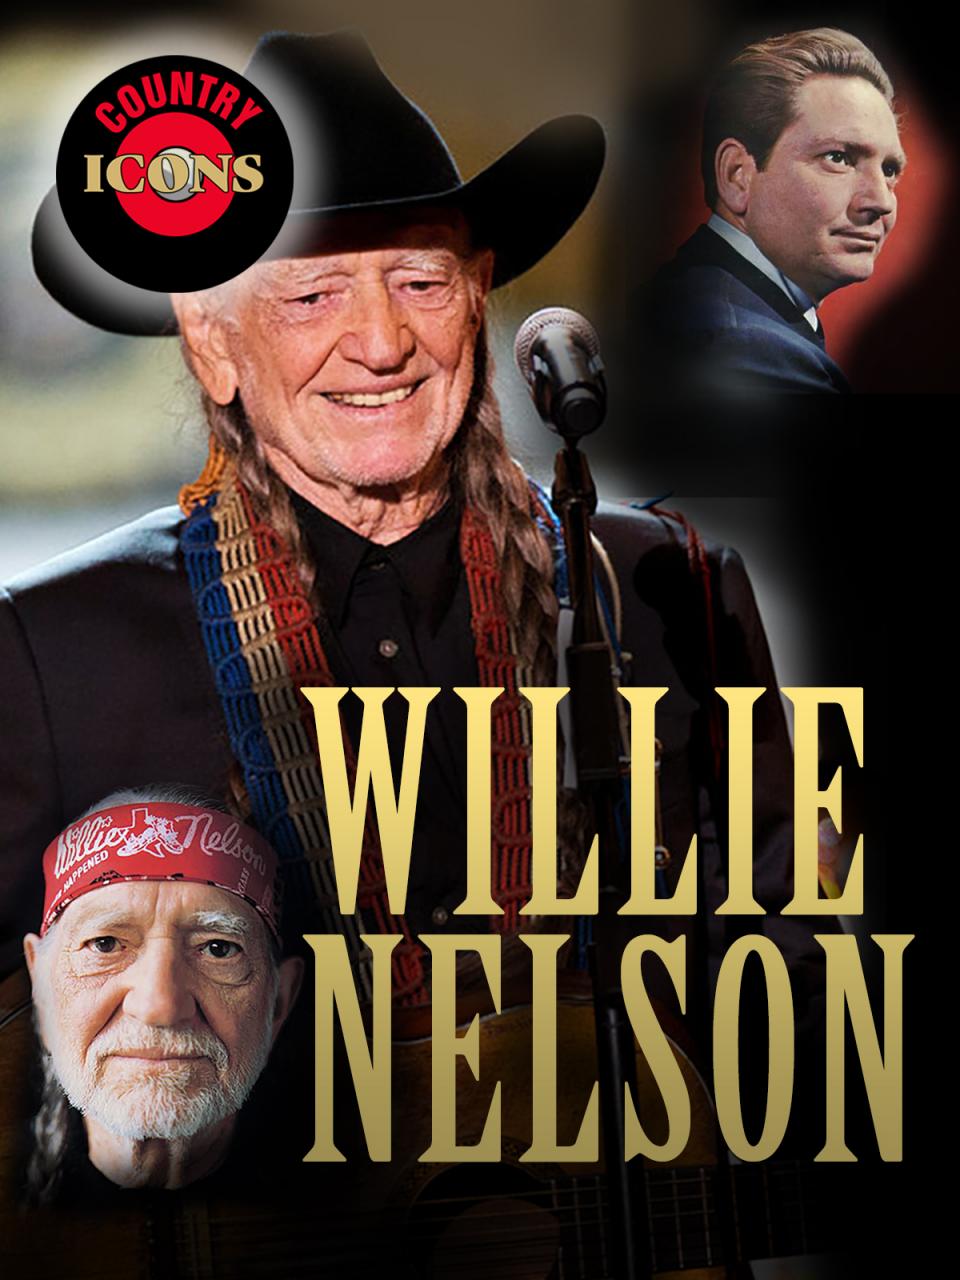 Country Icons: Willie Nelson